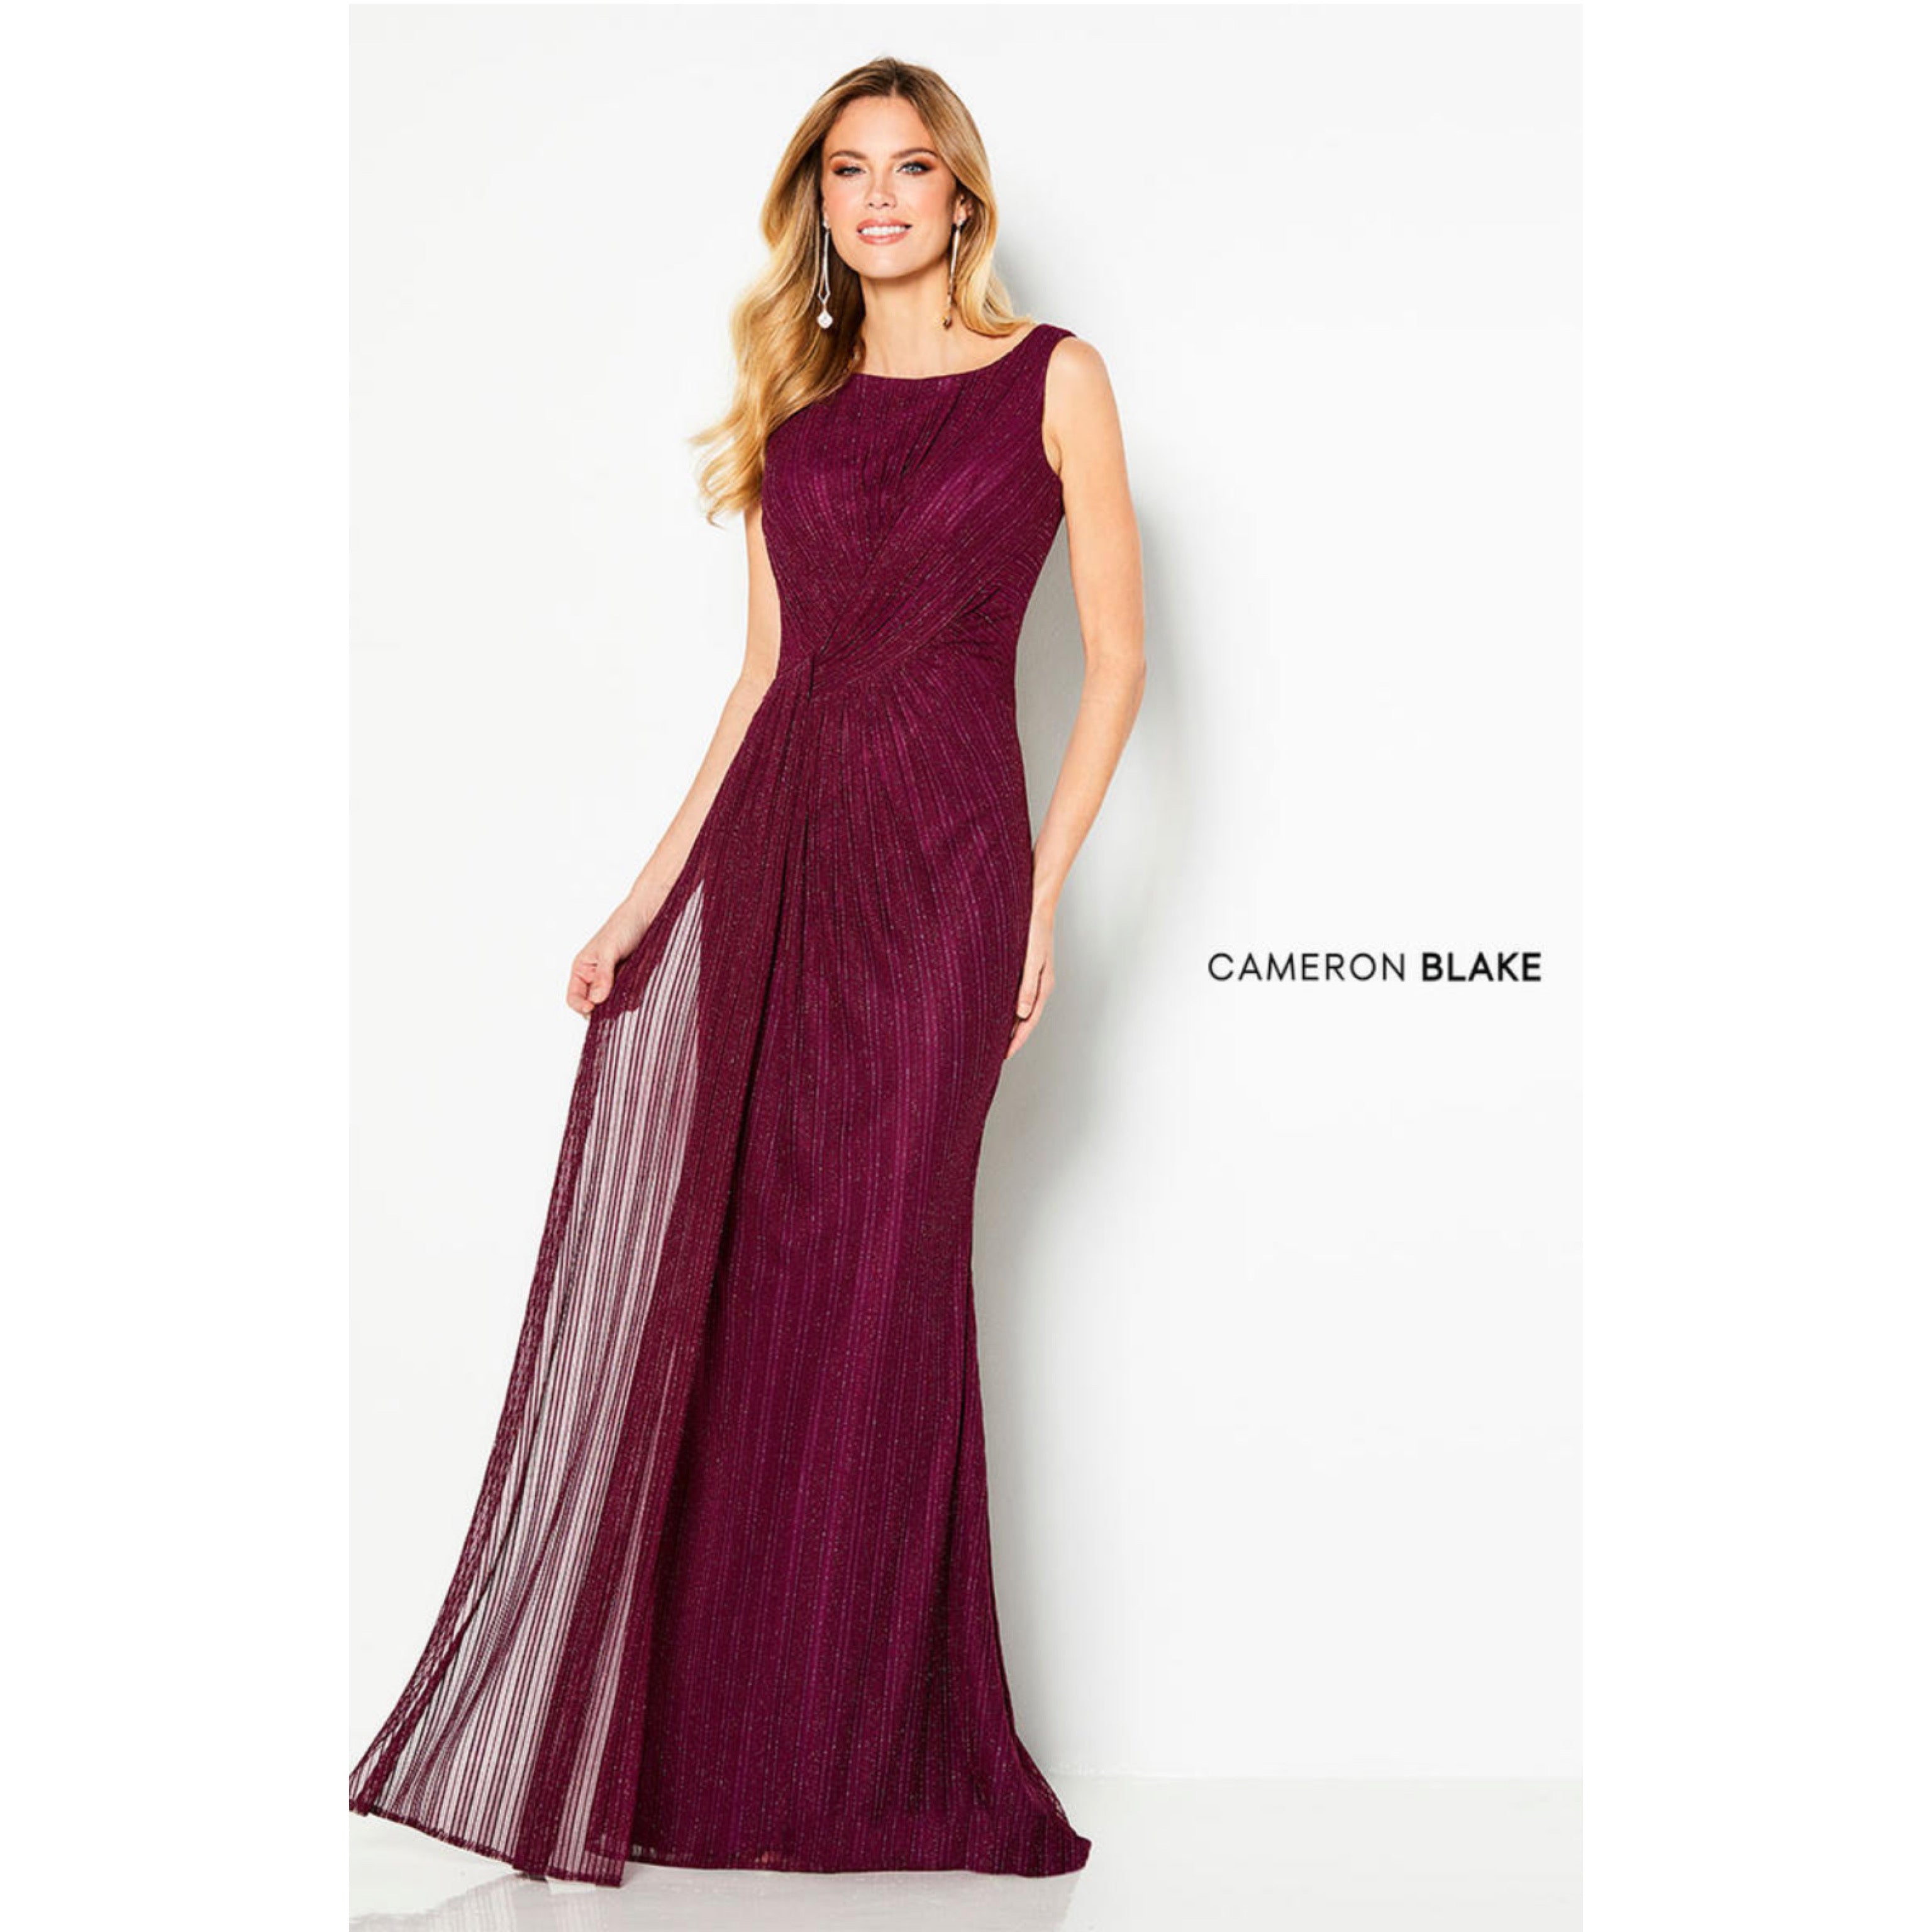 Cameron Blake aubergine dress, size 16, NEW WITH TAGS!